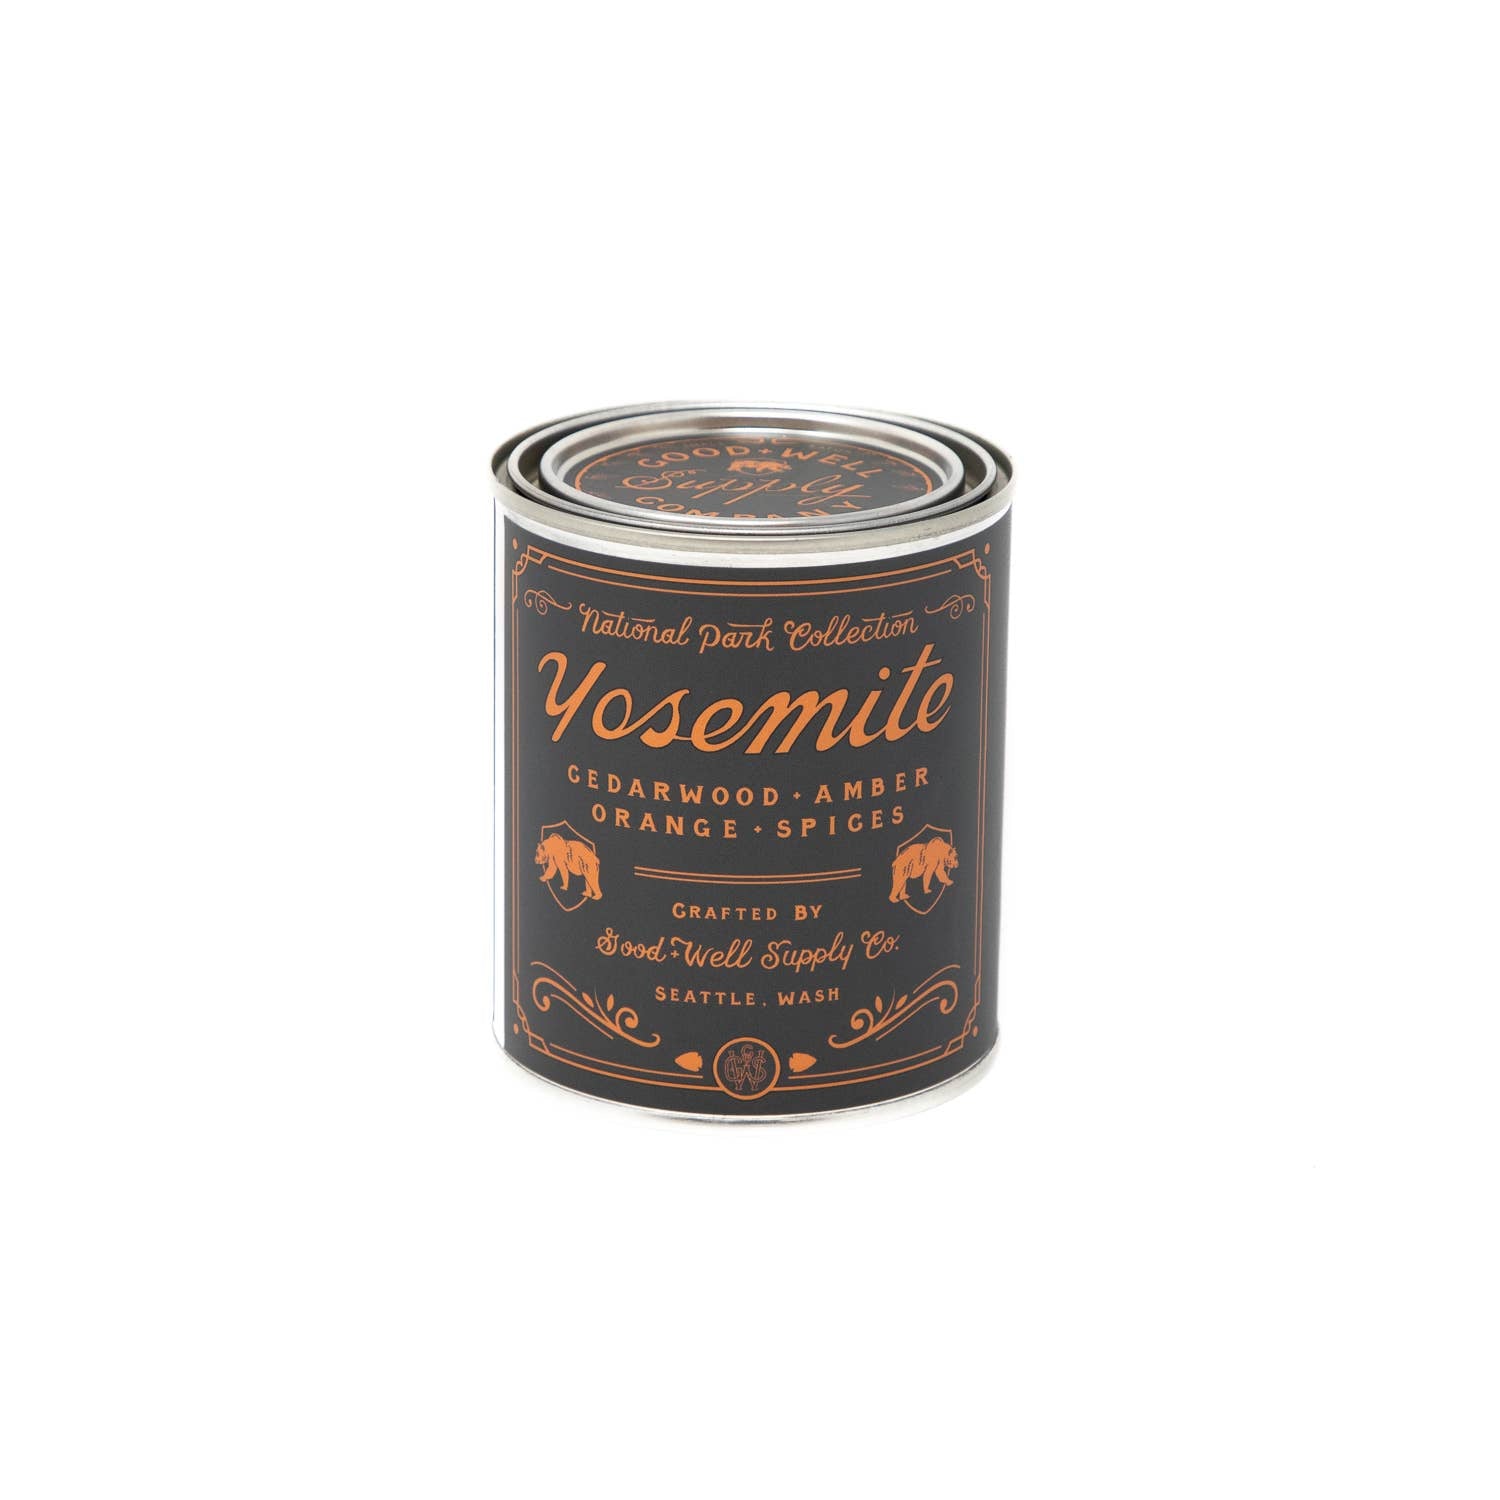 Yosemite candle in recycled tin by Good + Well Supply Co